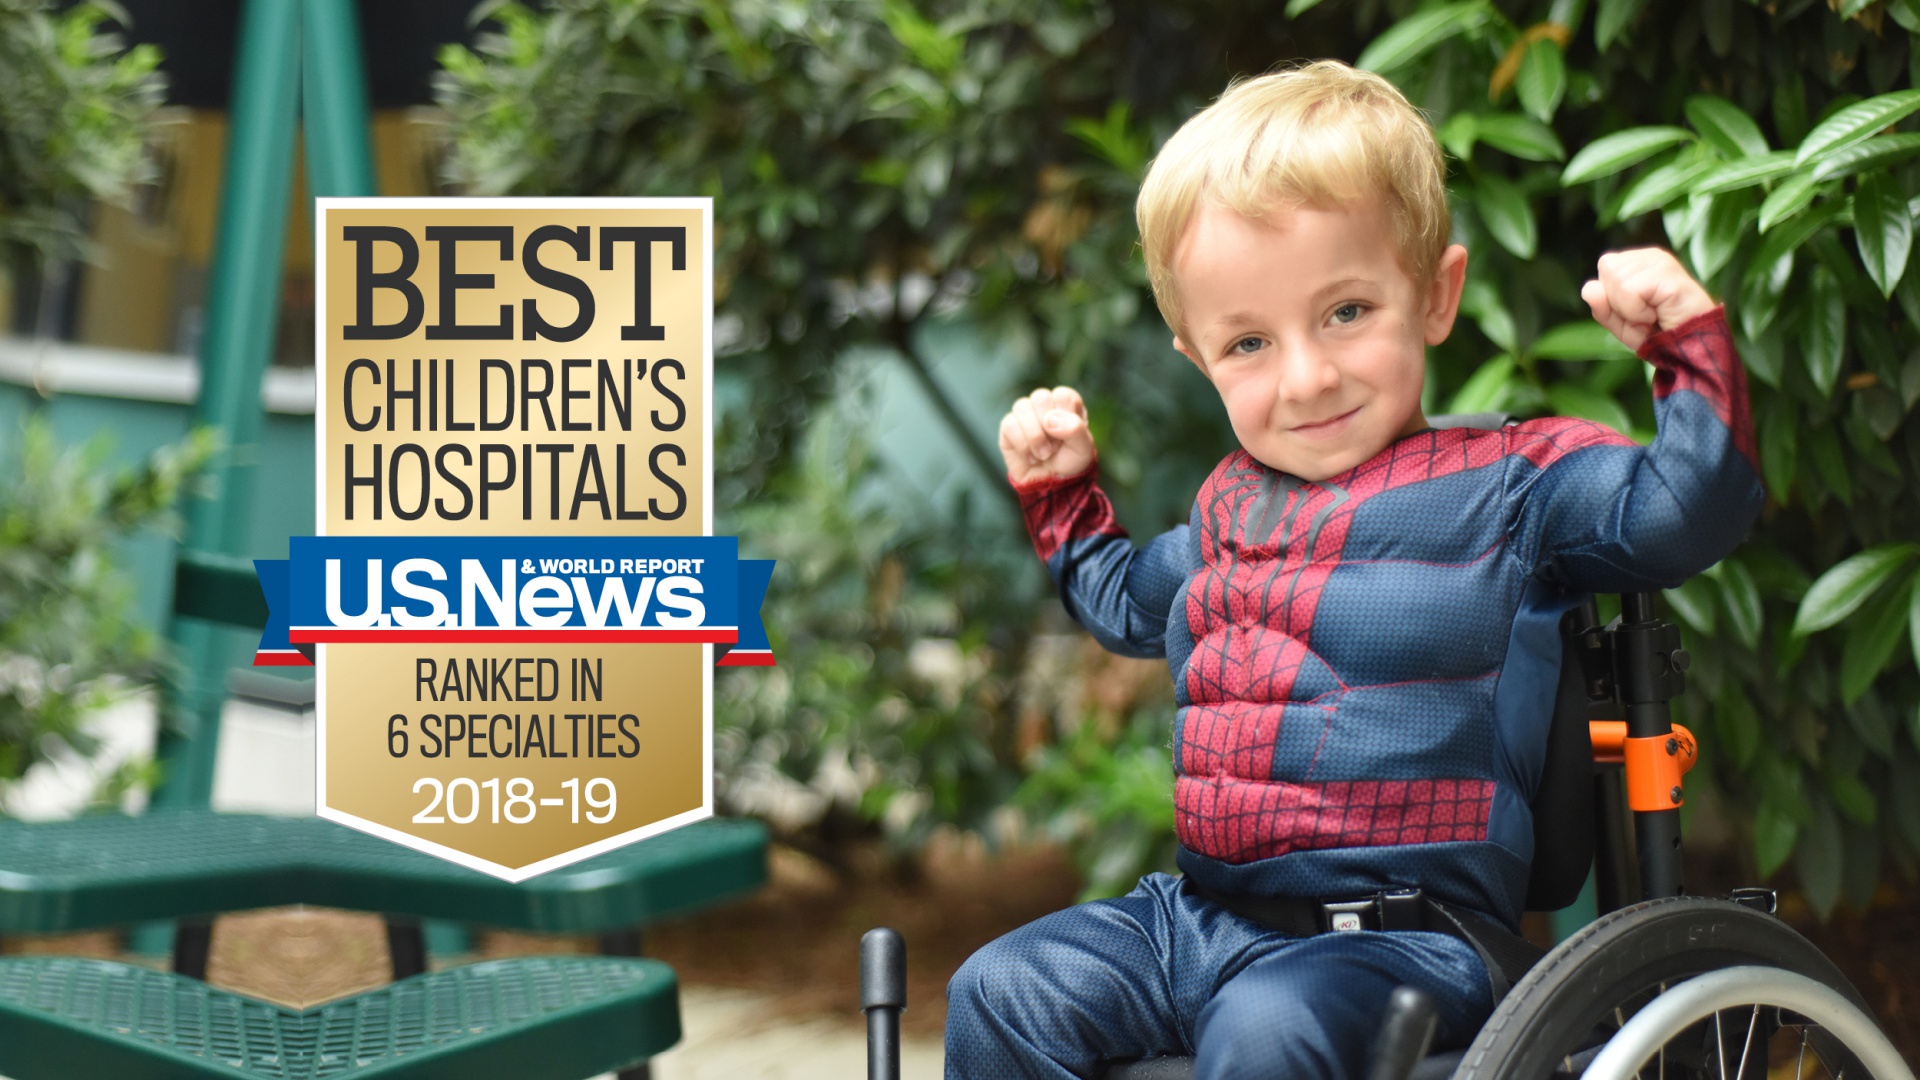 Being one of the nation’s top hospitals is a reputation we strive to earn every day, for every child. Once again, Levine Children’s Hospital has been named a Best Children’s Hospital by U.S. News & World Report in six specialties. Learn how we give our best for your child. 